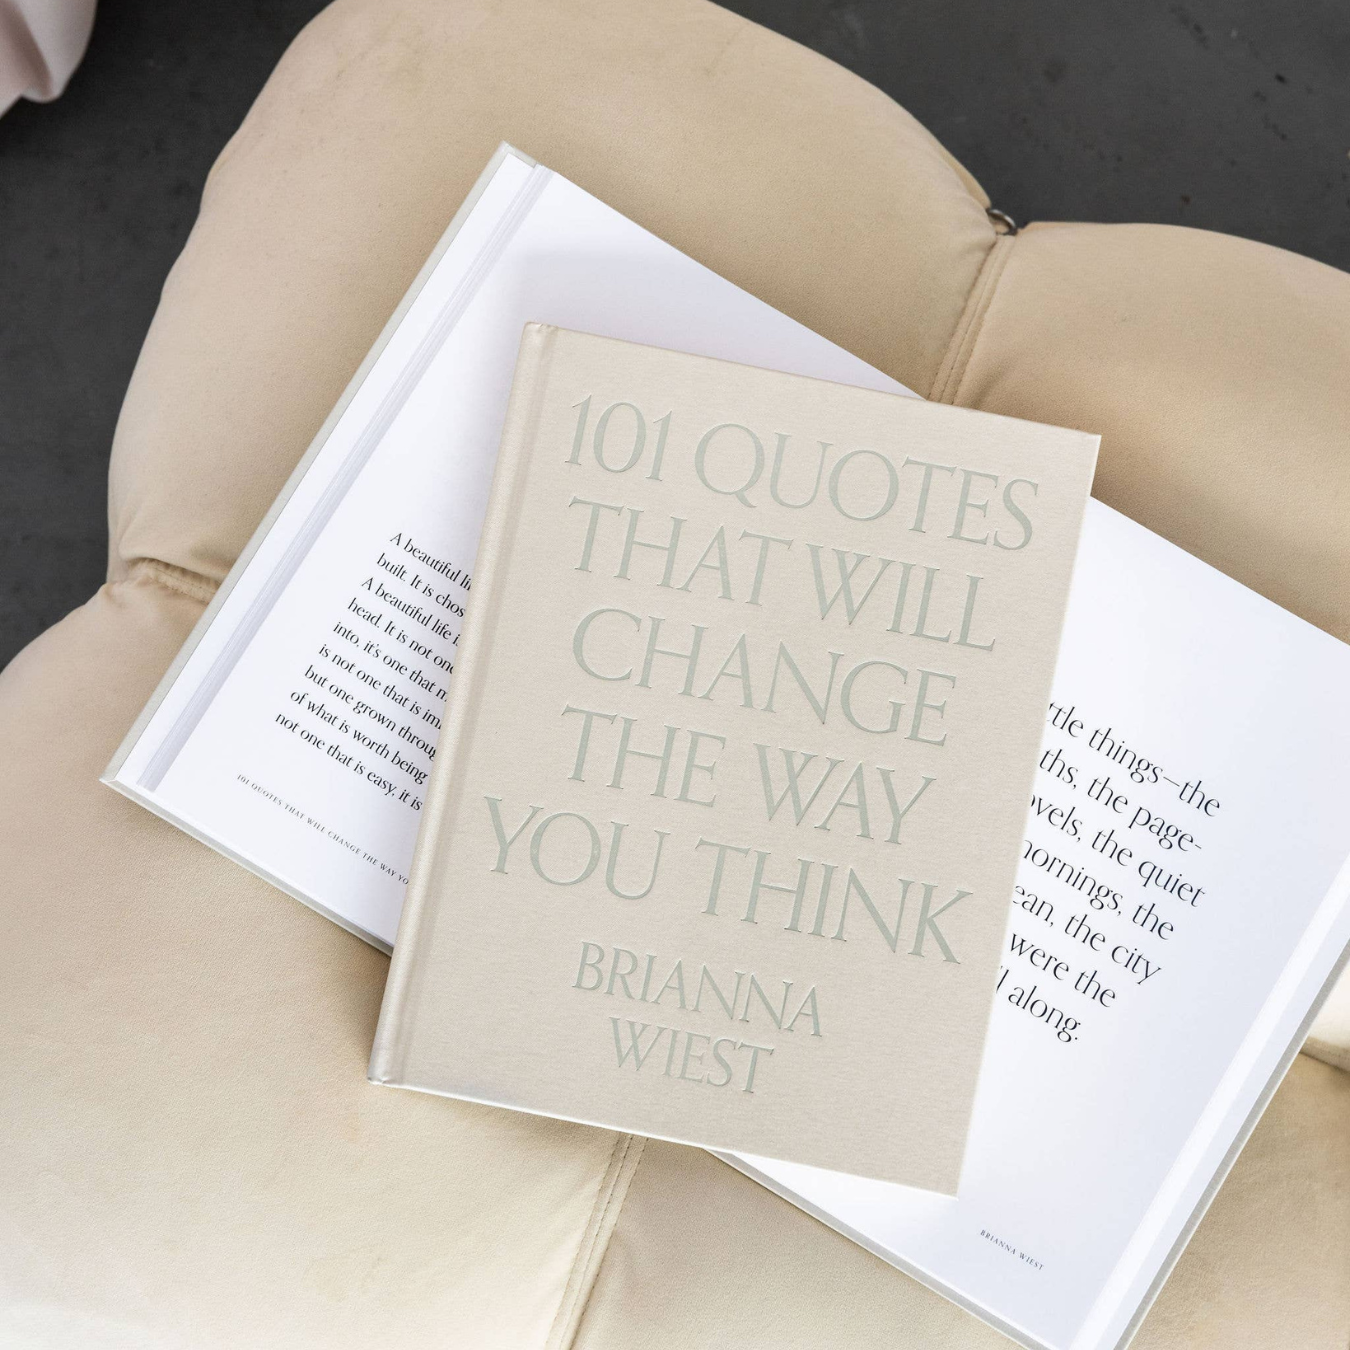 101 Quotes That Will Change The Way You Think - Coffee Table Book - By Brianna Wiest